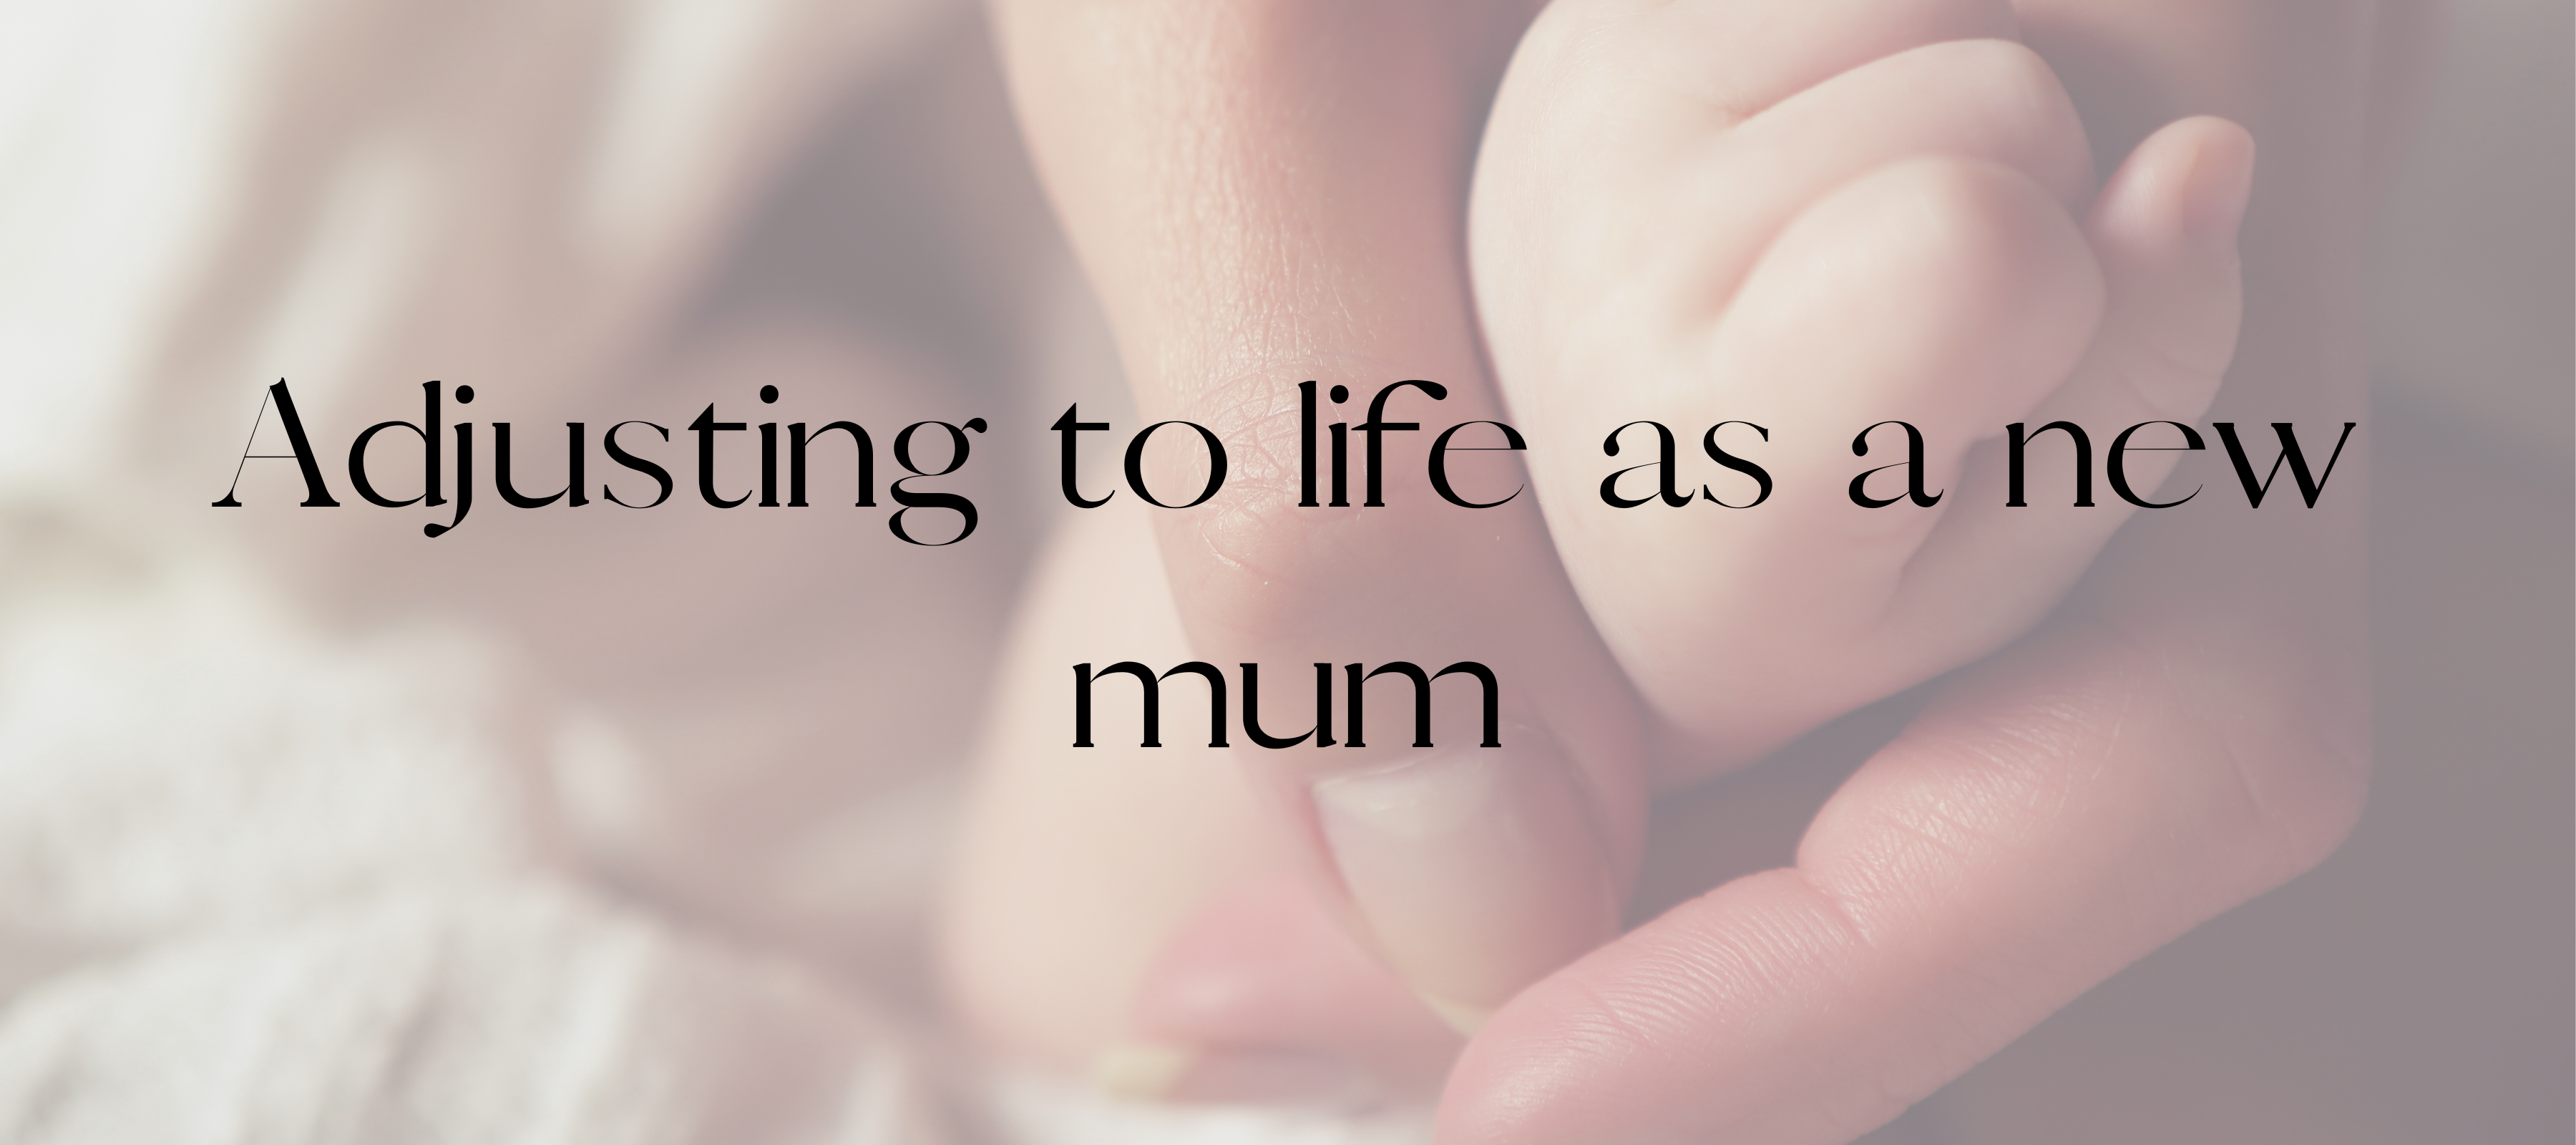 Adjusting to life as a new mum